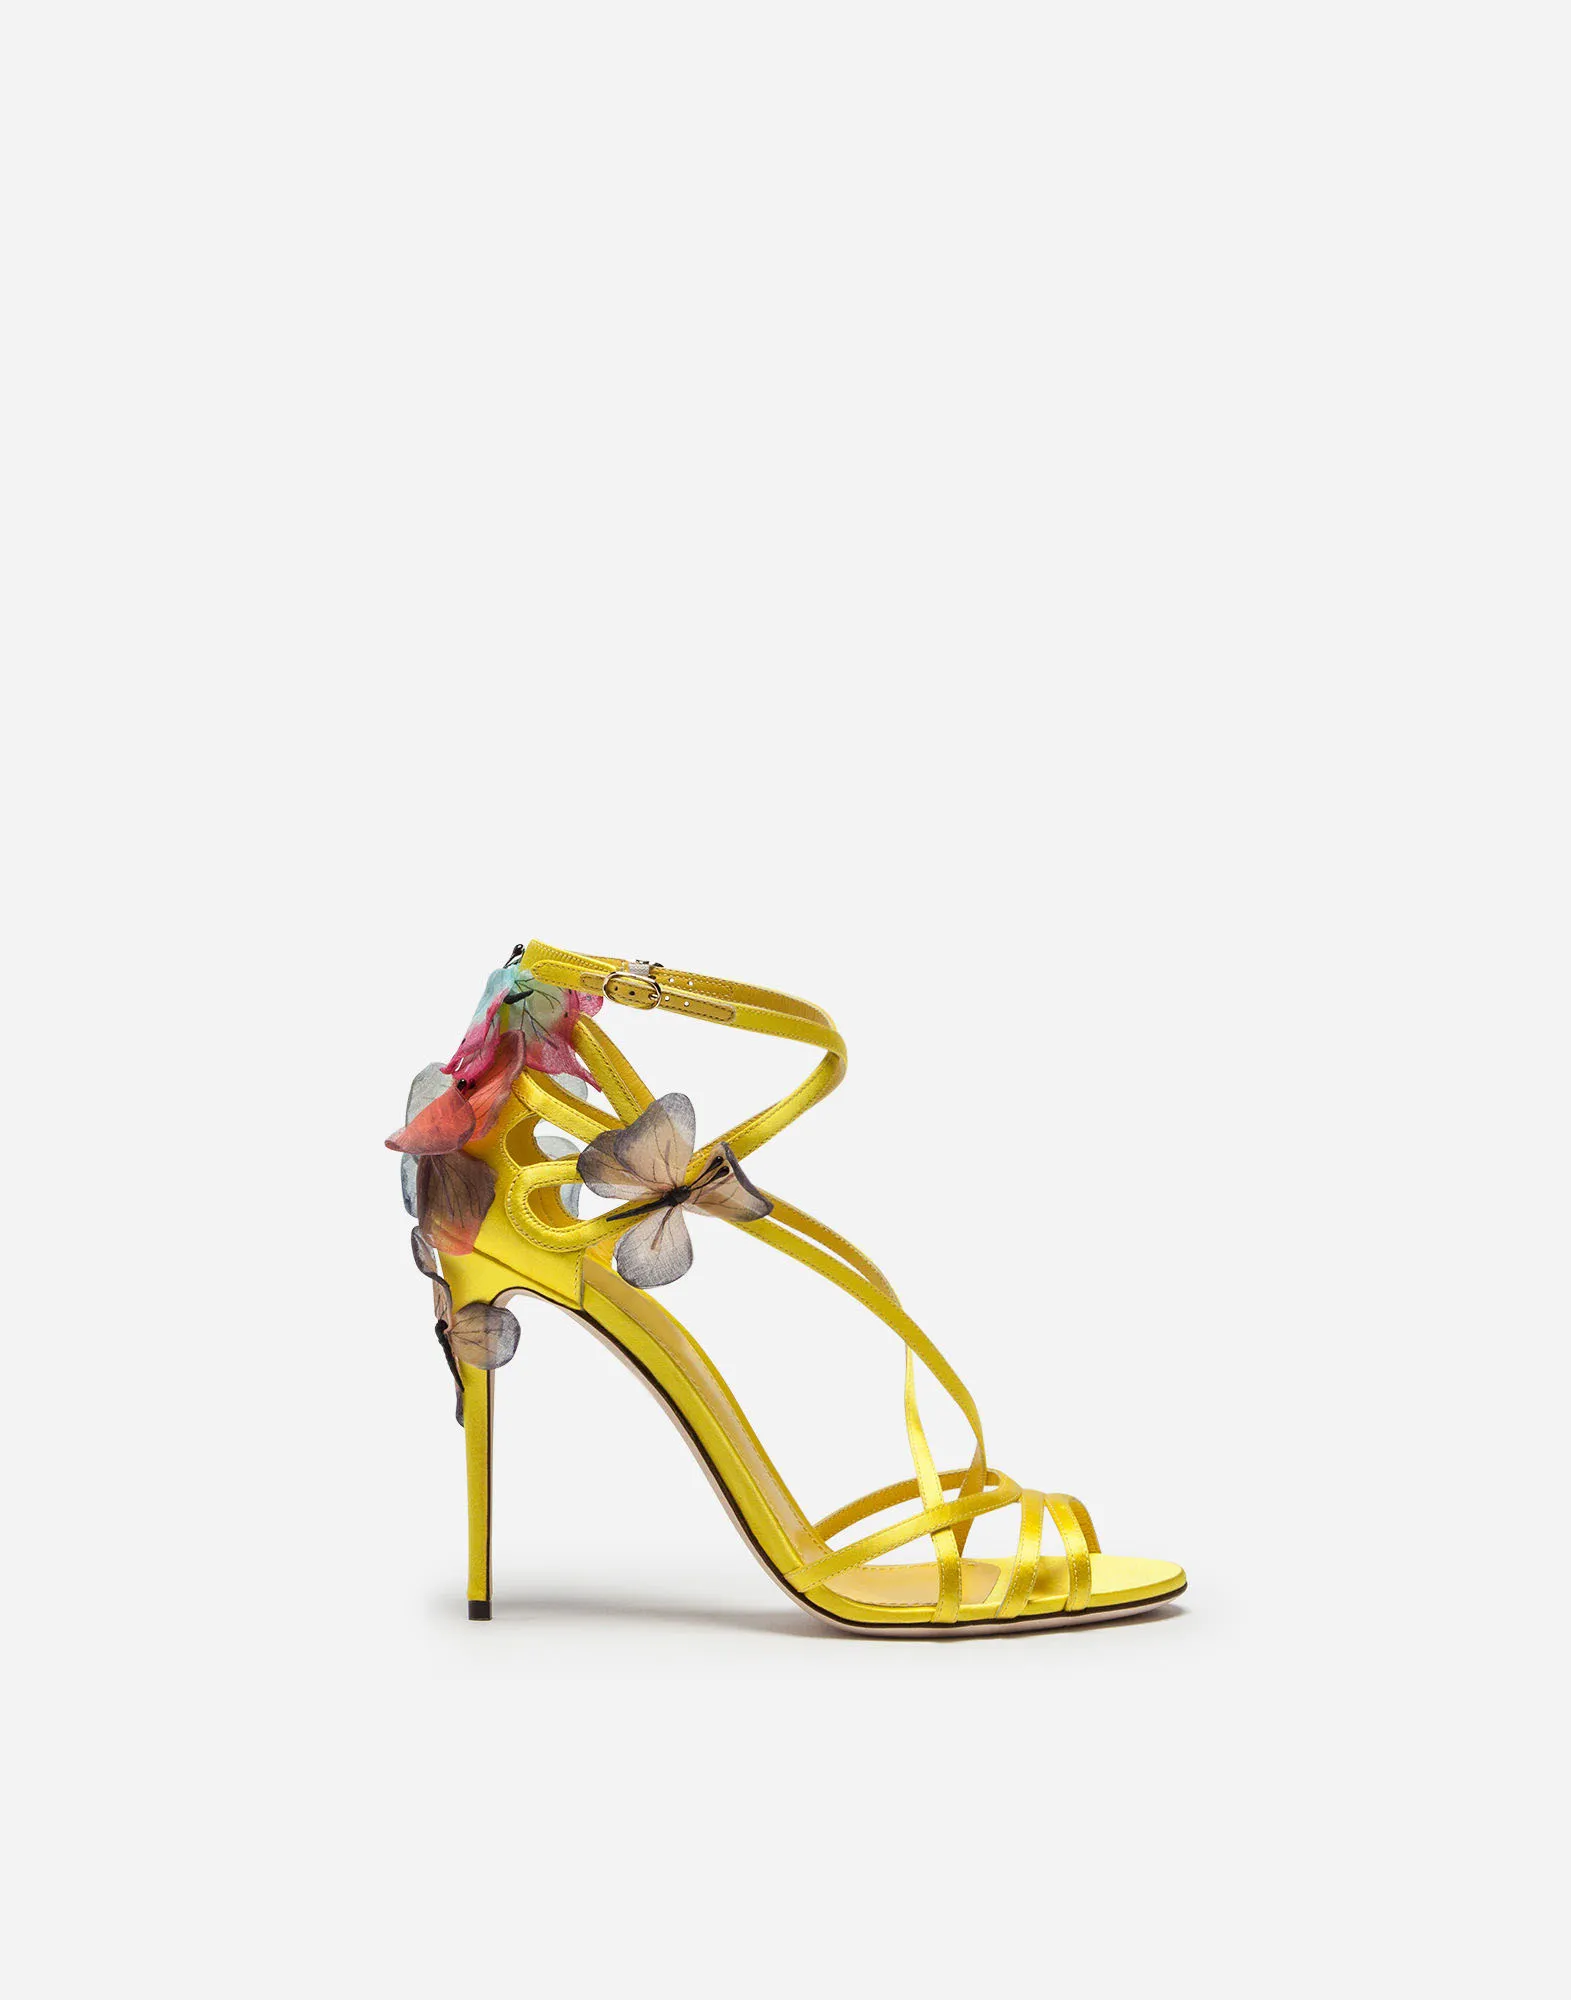 Zara High Heels in Lapaz for sale ▷ Prices on Jiji.com.gh